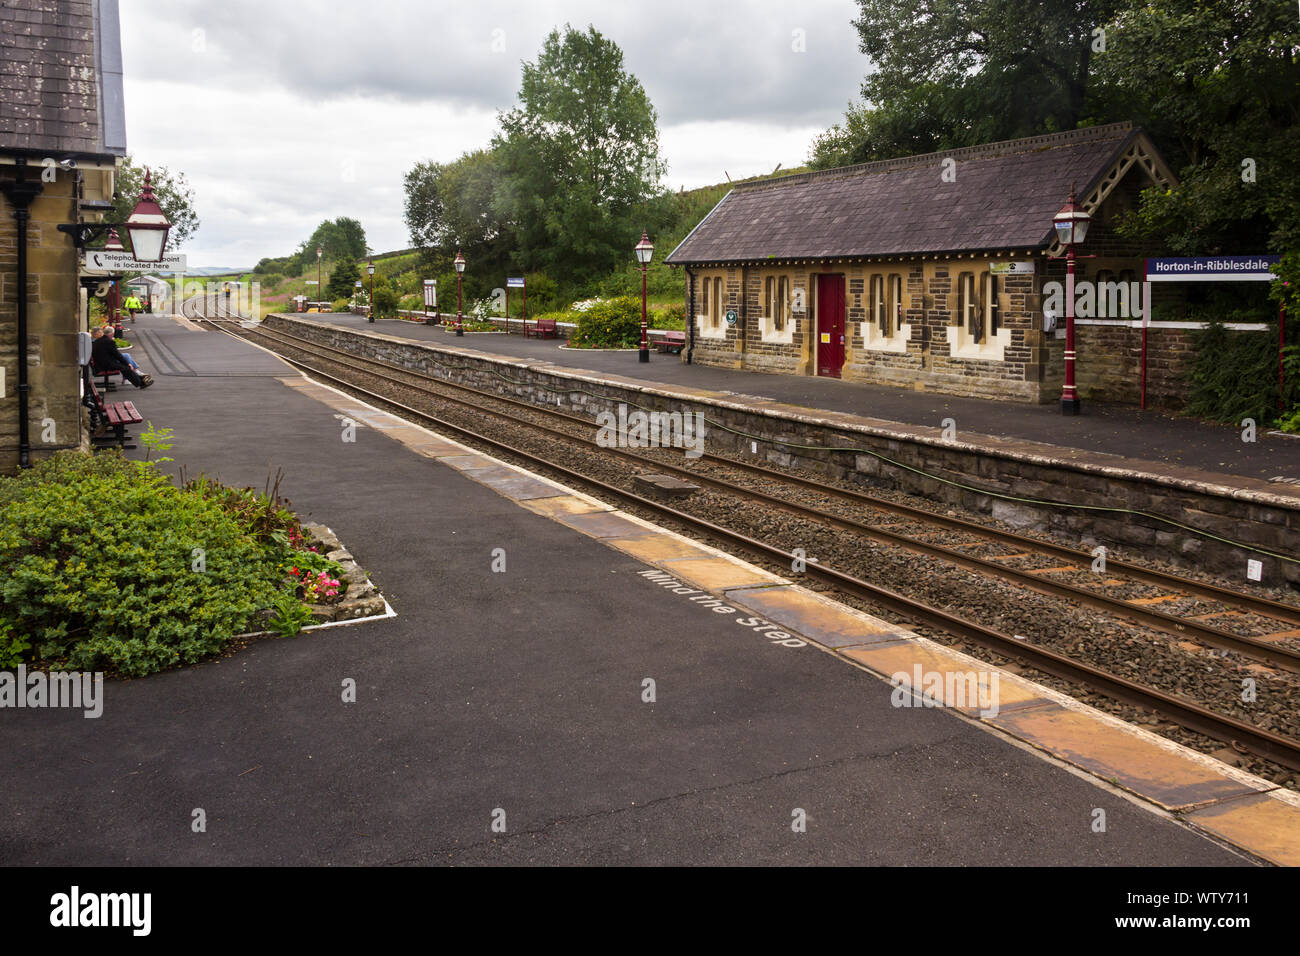 The railway station Horton-in-Ribblesdale, North Yorkshire on a dull, cloudy day, with a diesel passenger train approaching northbound in the distance Stock Photo